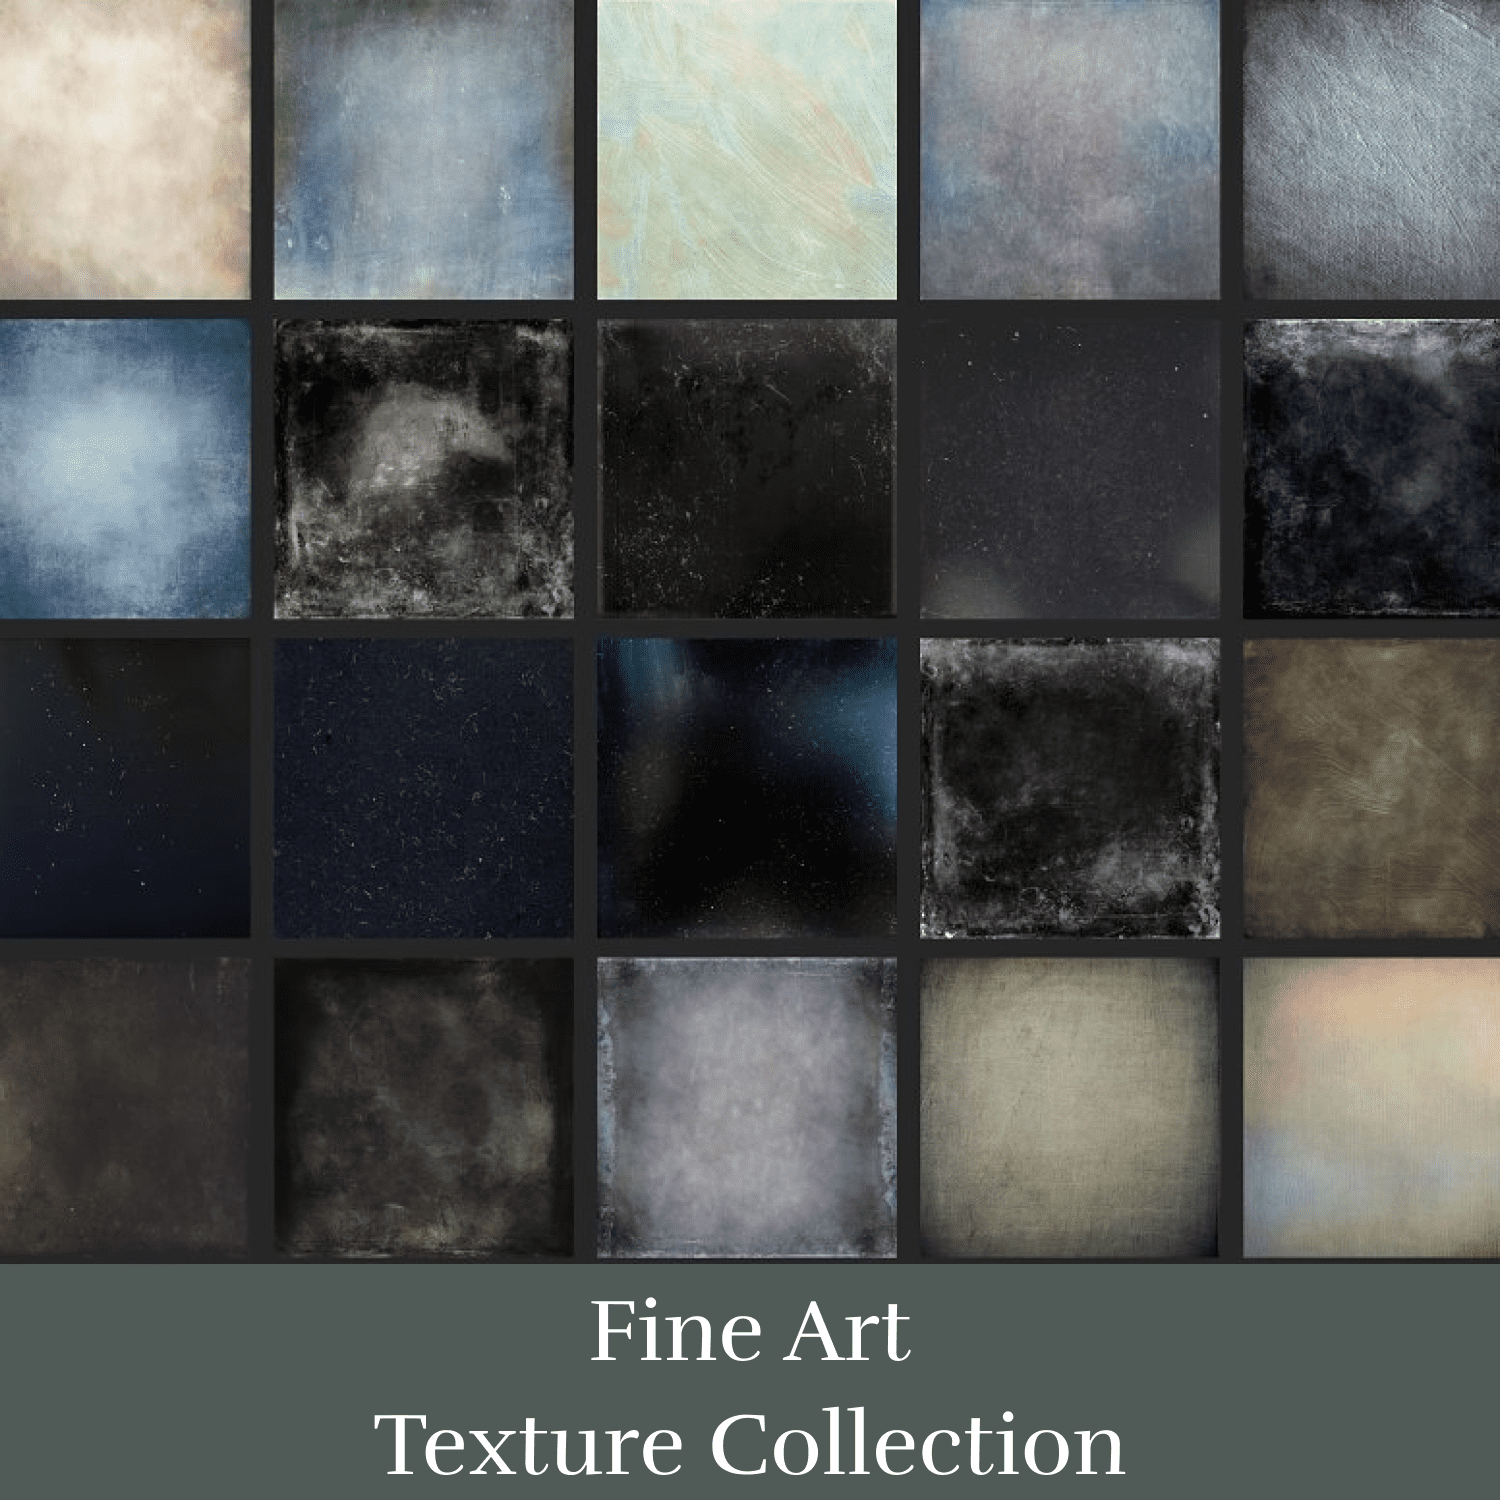 Fine Art Texture Collection cover.